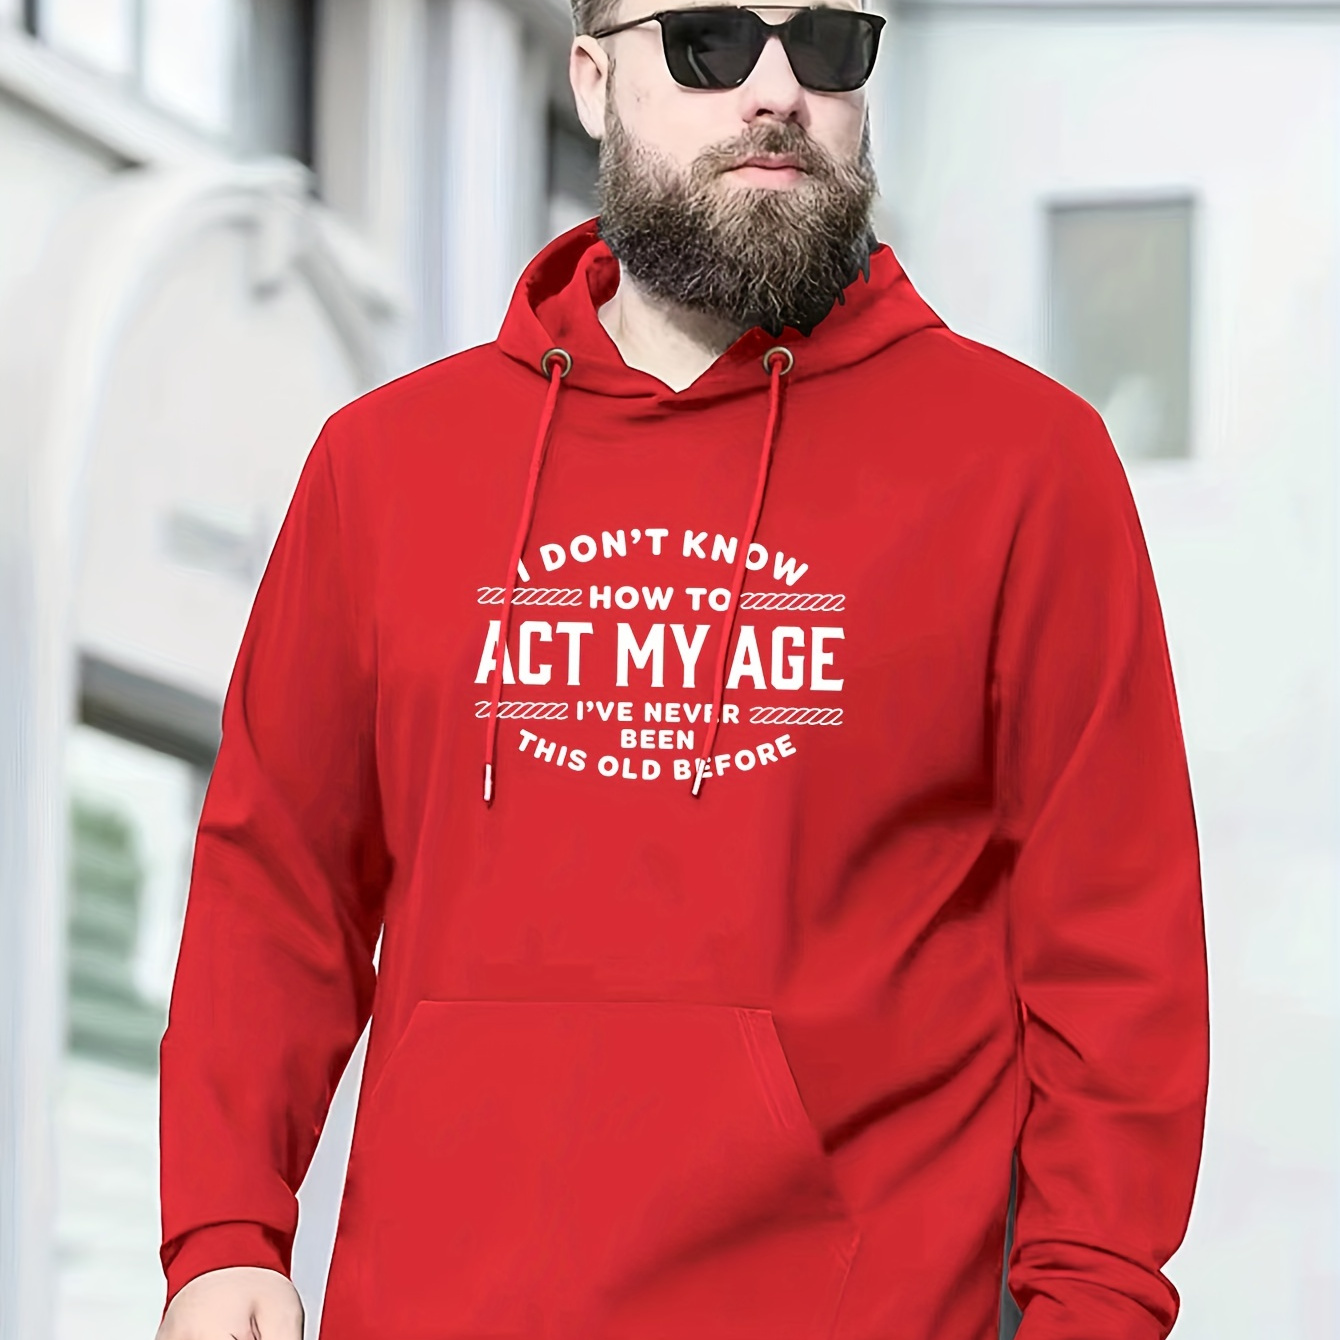 

Plus Size Men's "i Don't Know How To Act My Age" Print Hooded Sweatshirt Oversized Hoodies Fashion Casual Tops For Spring/autumn, Men's Clothing